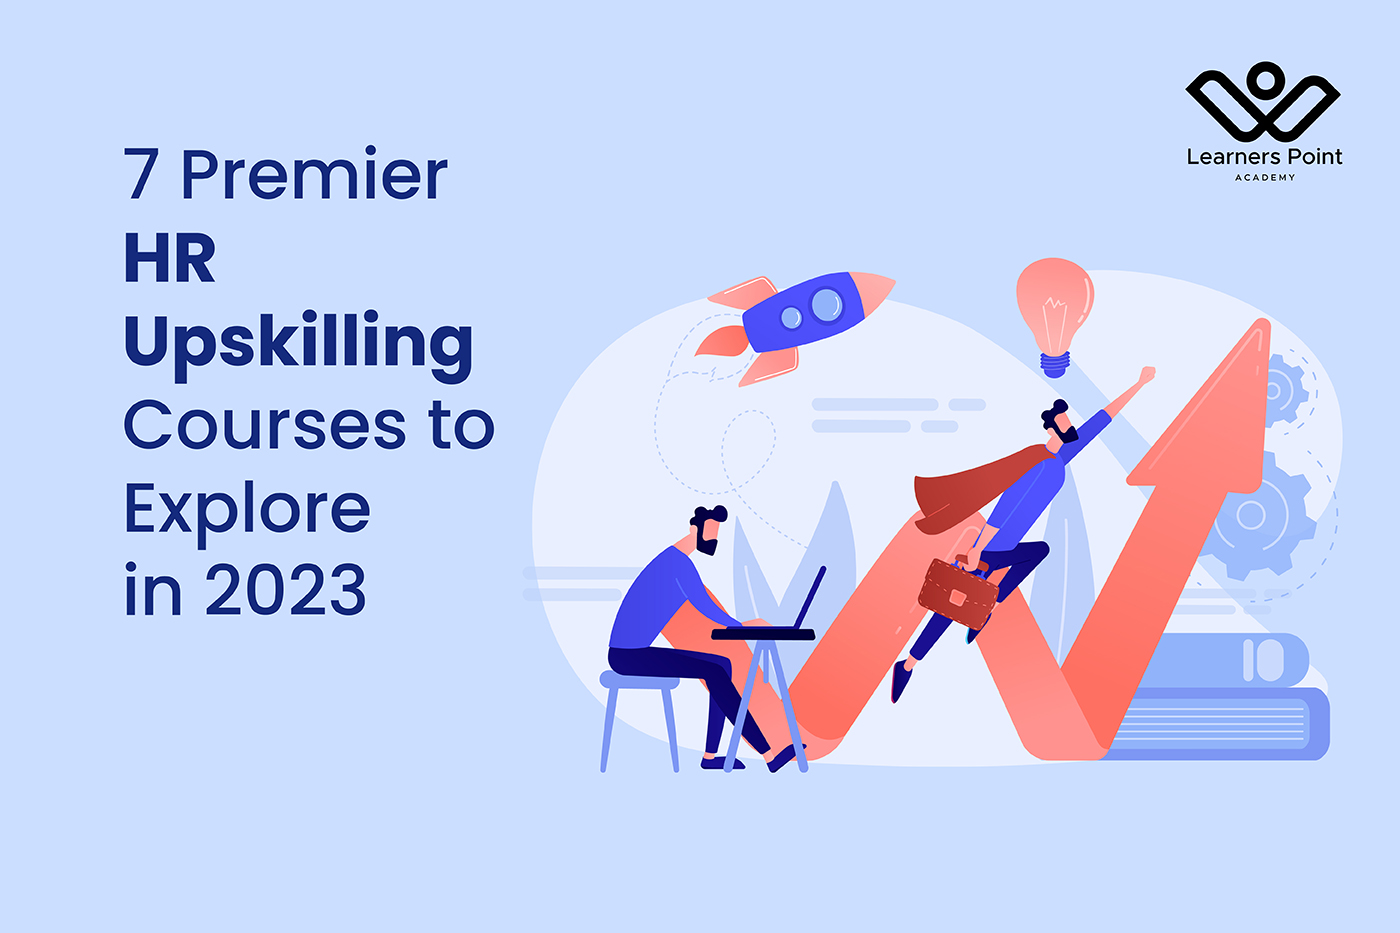 7 Premier HR Upskilling Courses to Explore in 2023